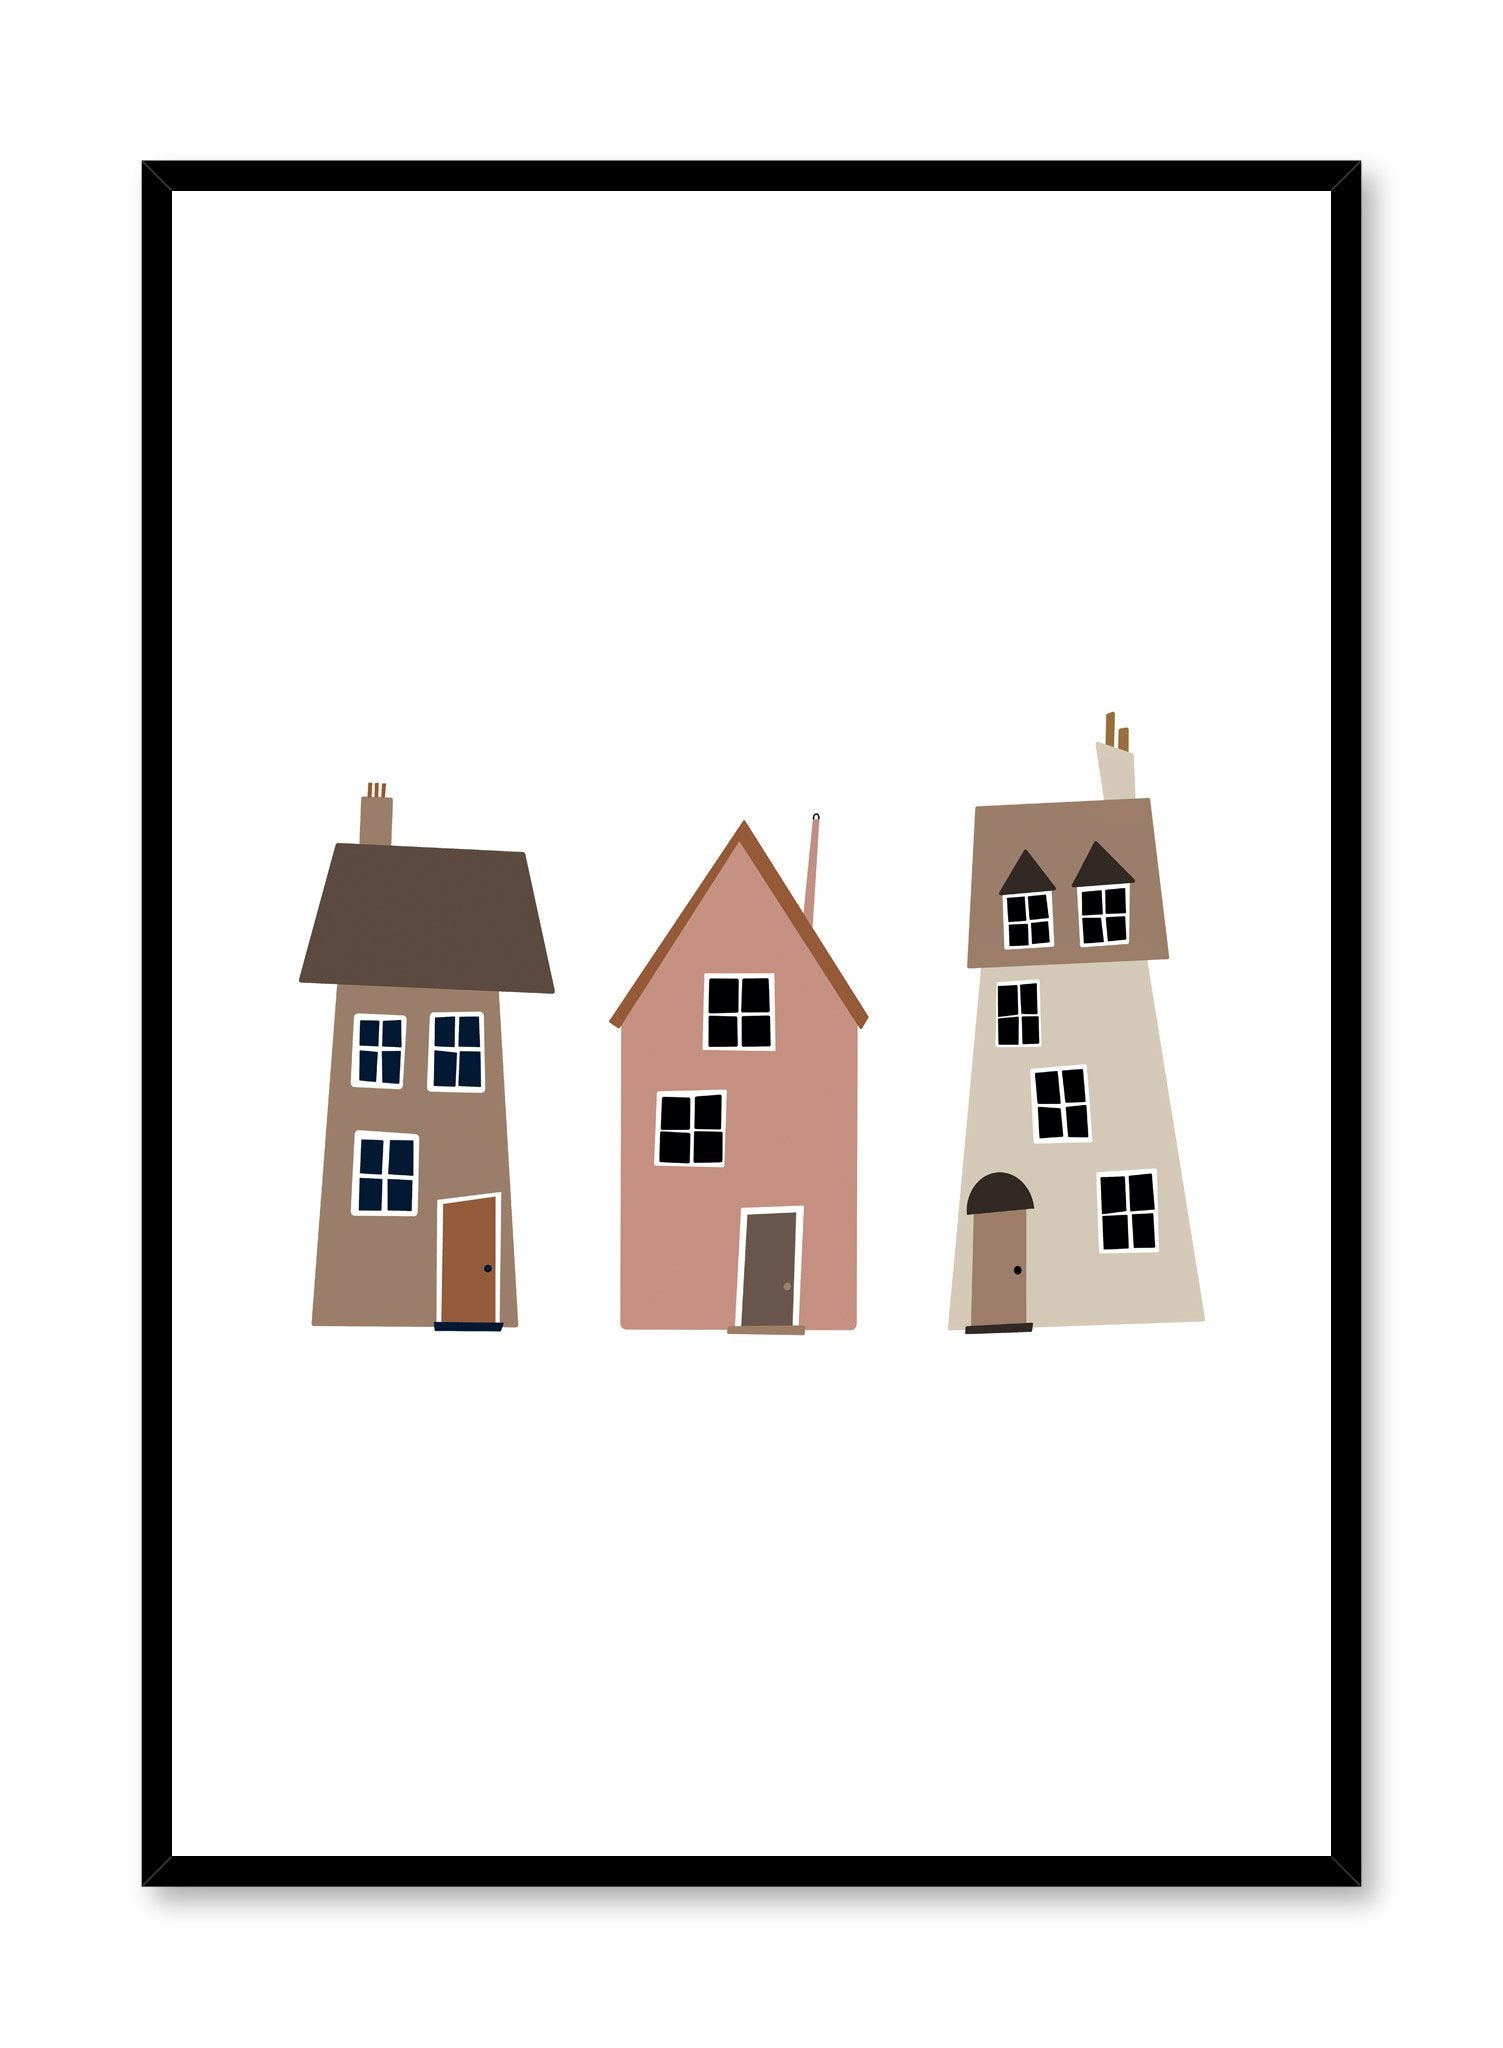 Kids nursery poster by Opposite Wall with trio of houses illustration